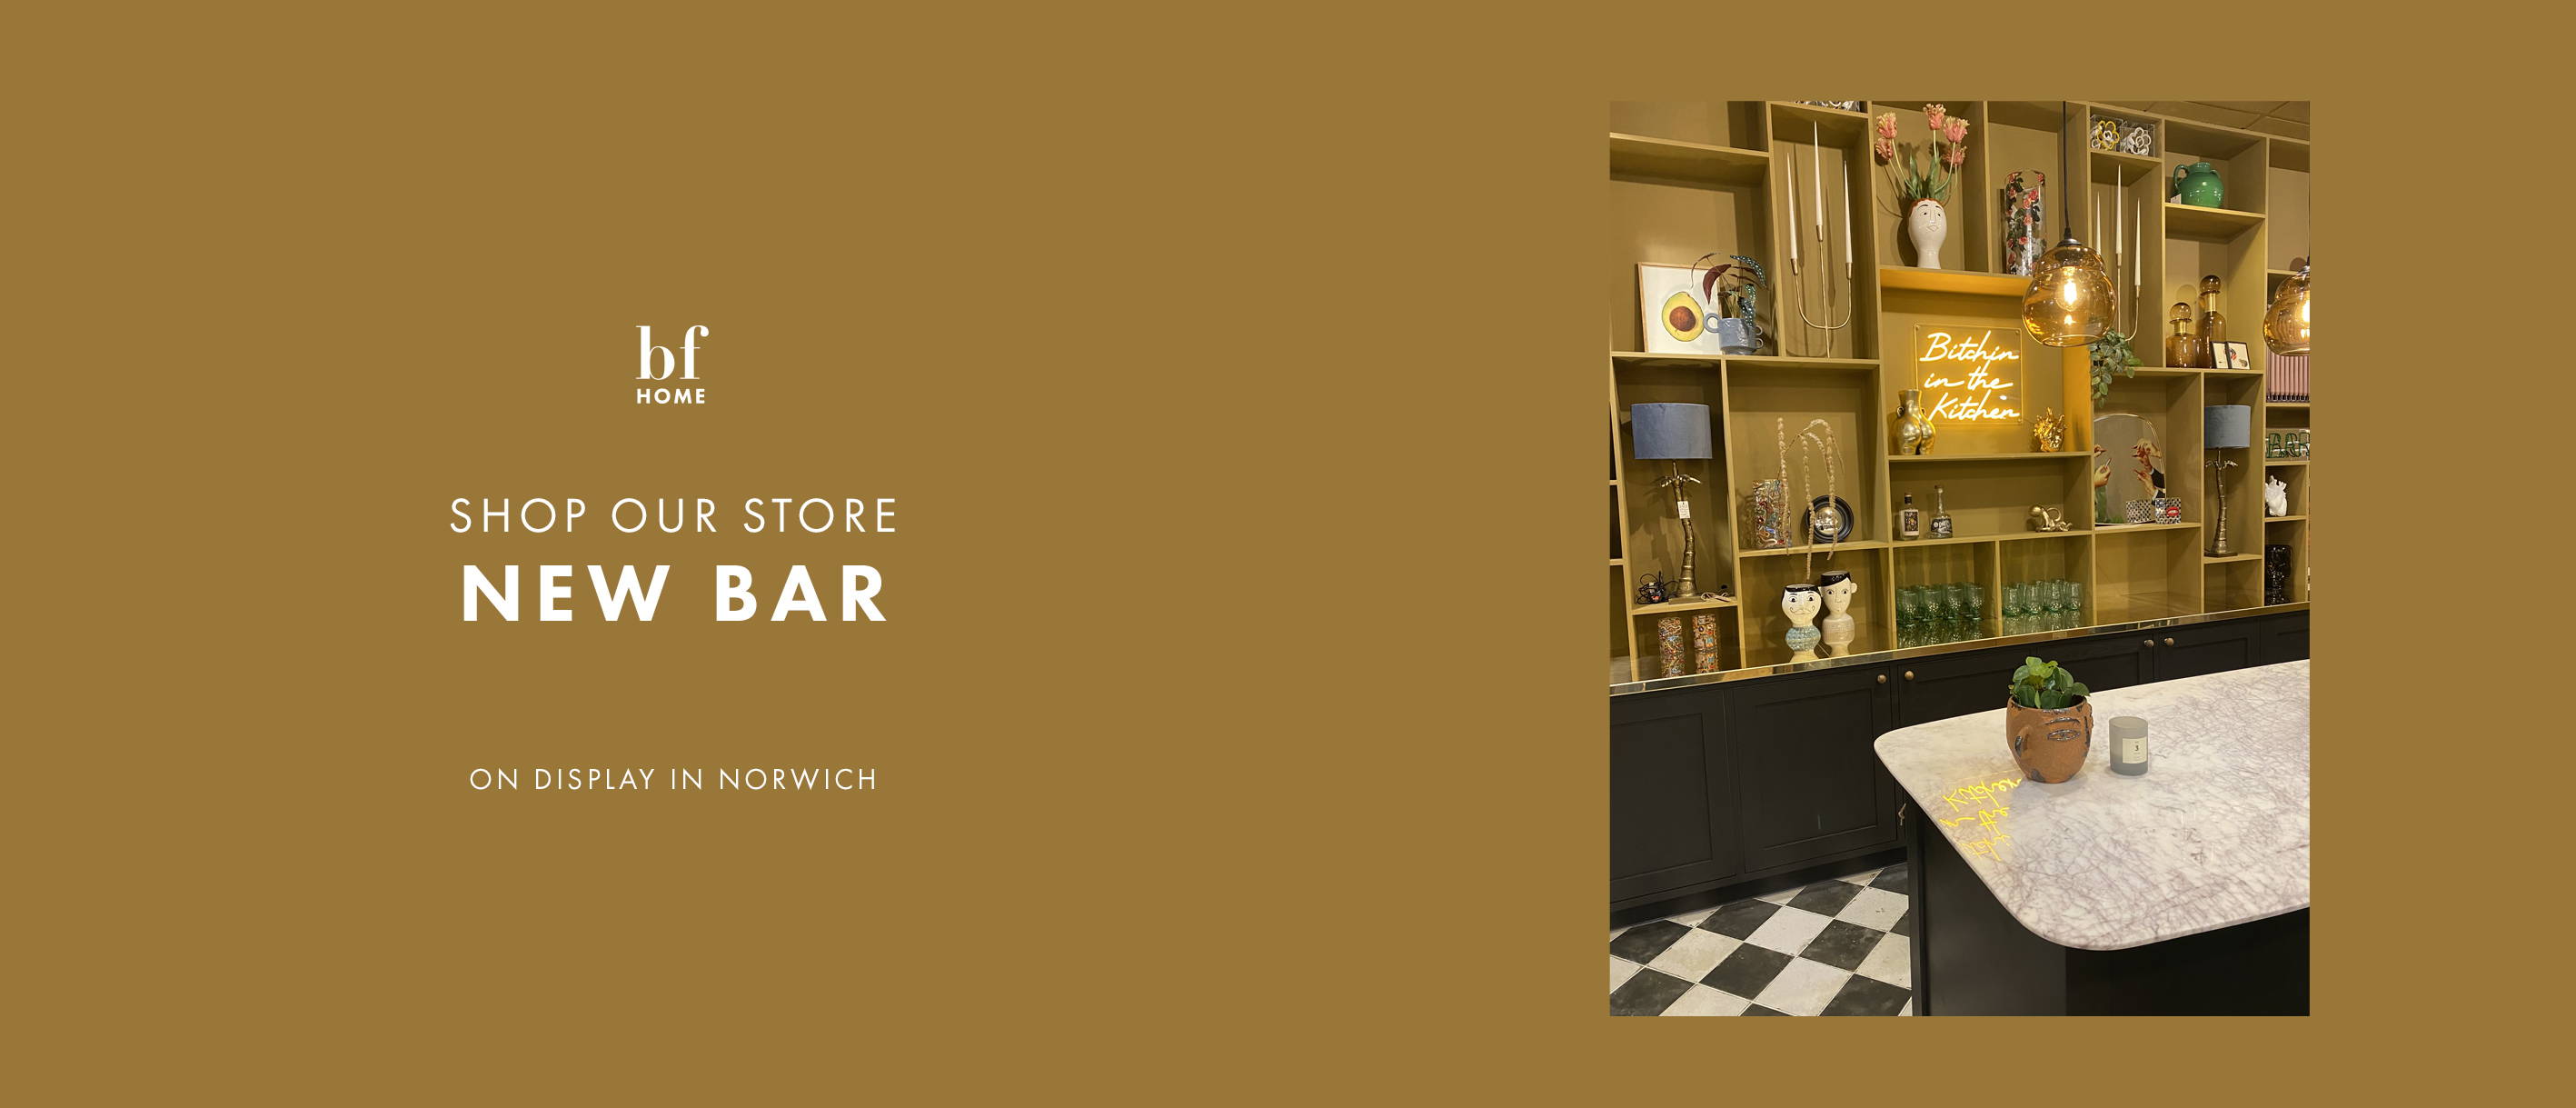 Brand New Bar At BF Home In Norwich - Have A Drink Whilst You Shop Our Store